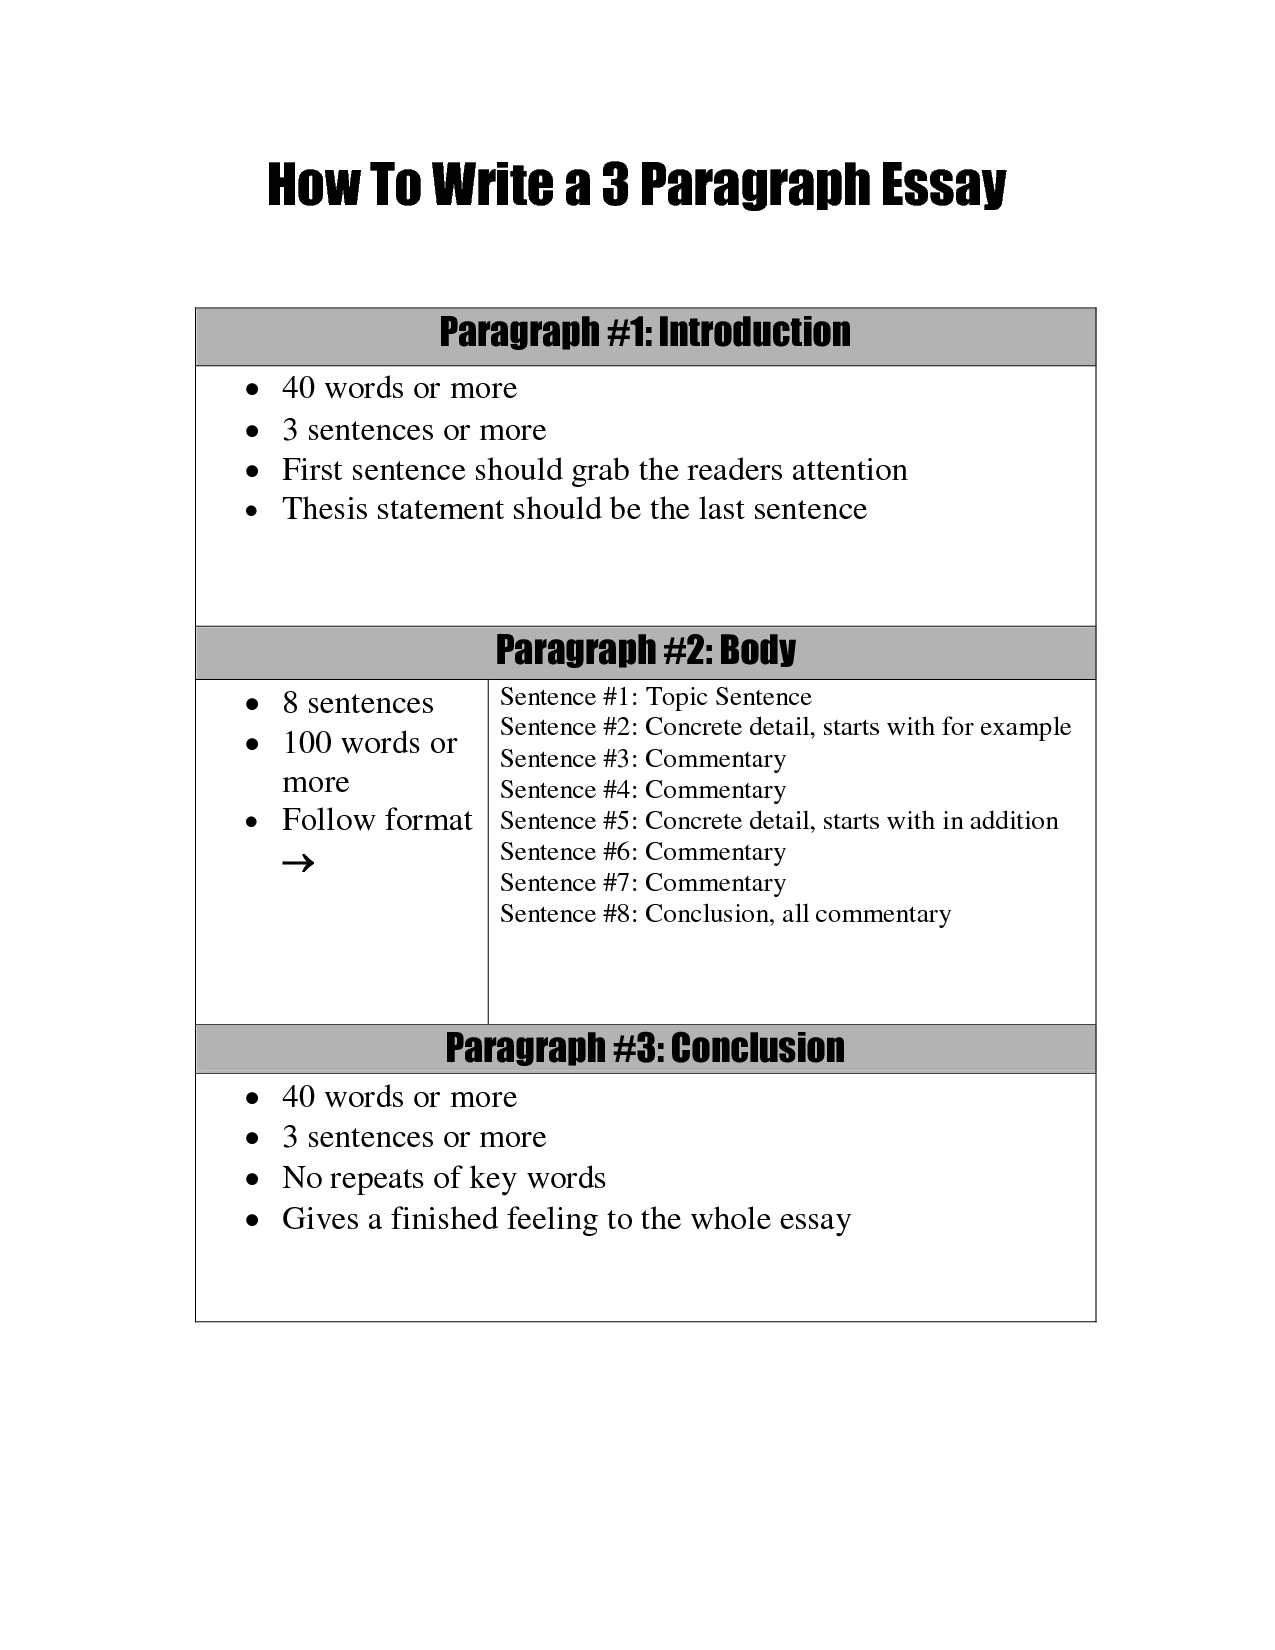 how to write an 3 paragraph essay